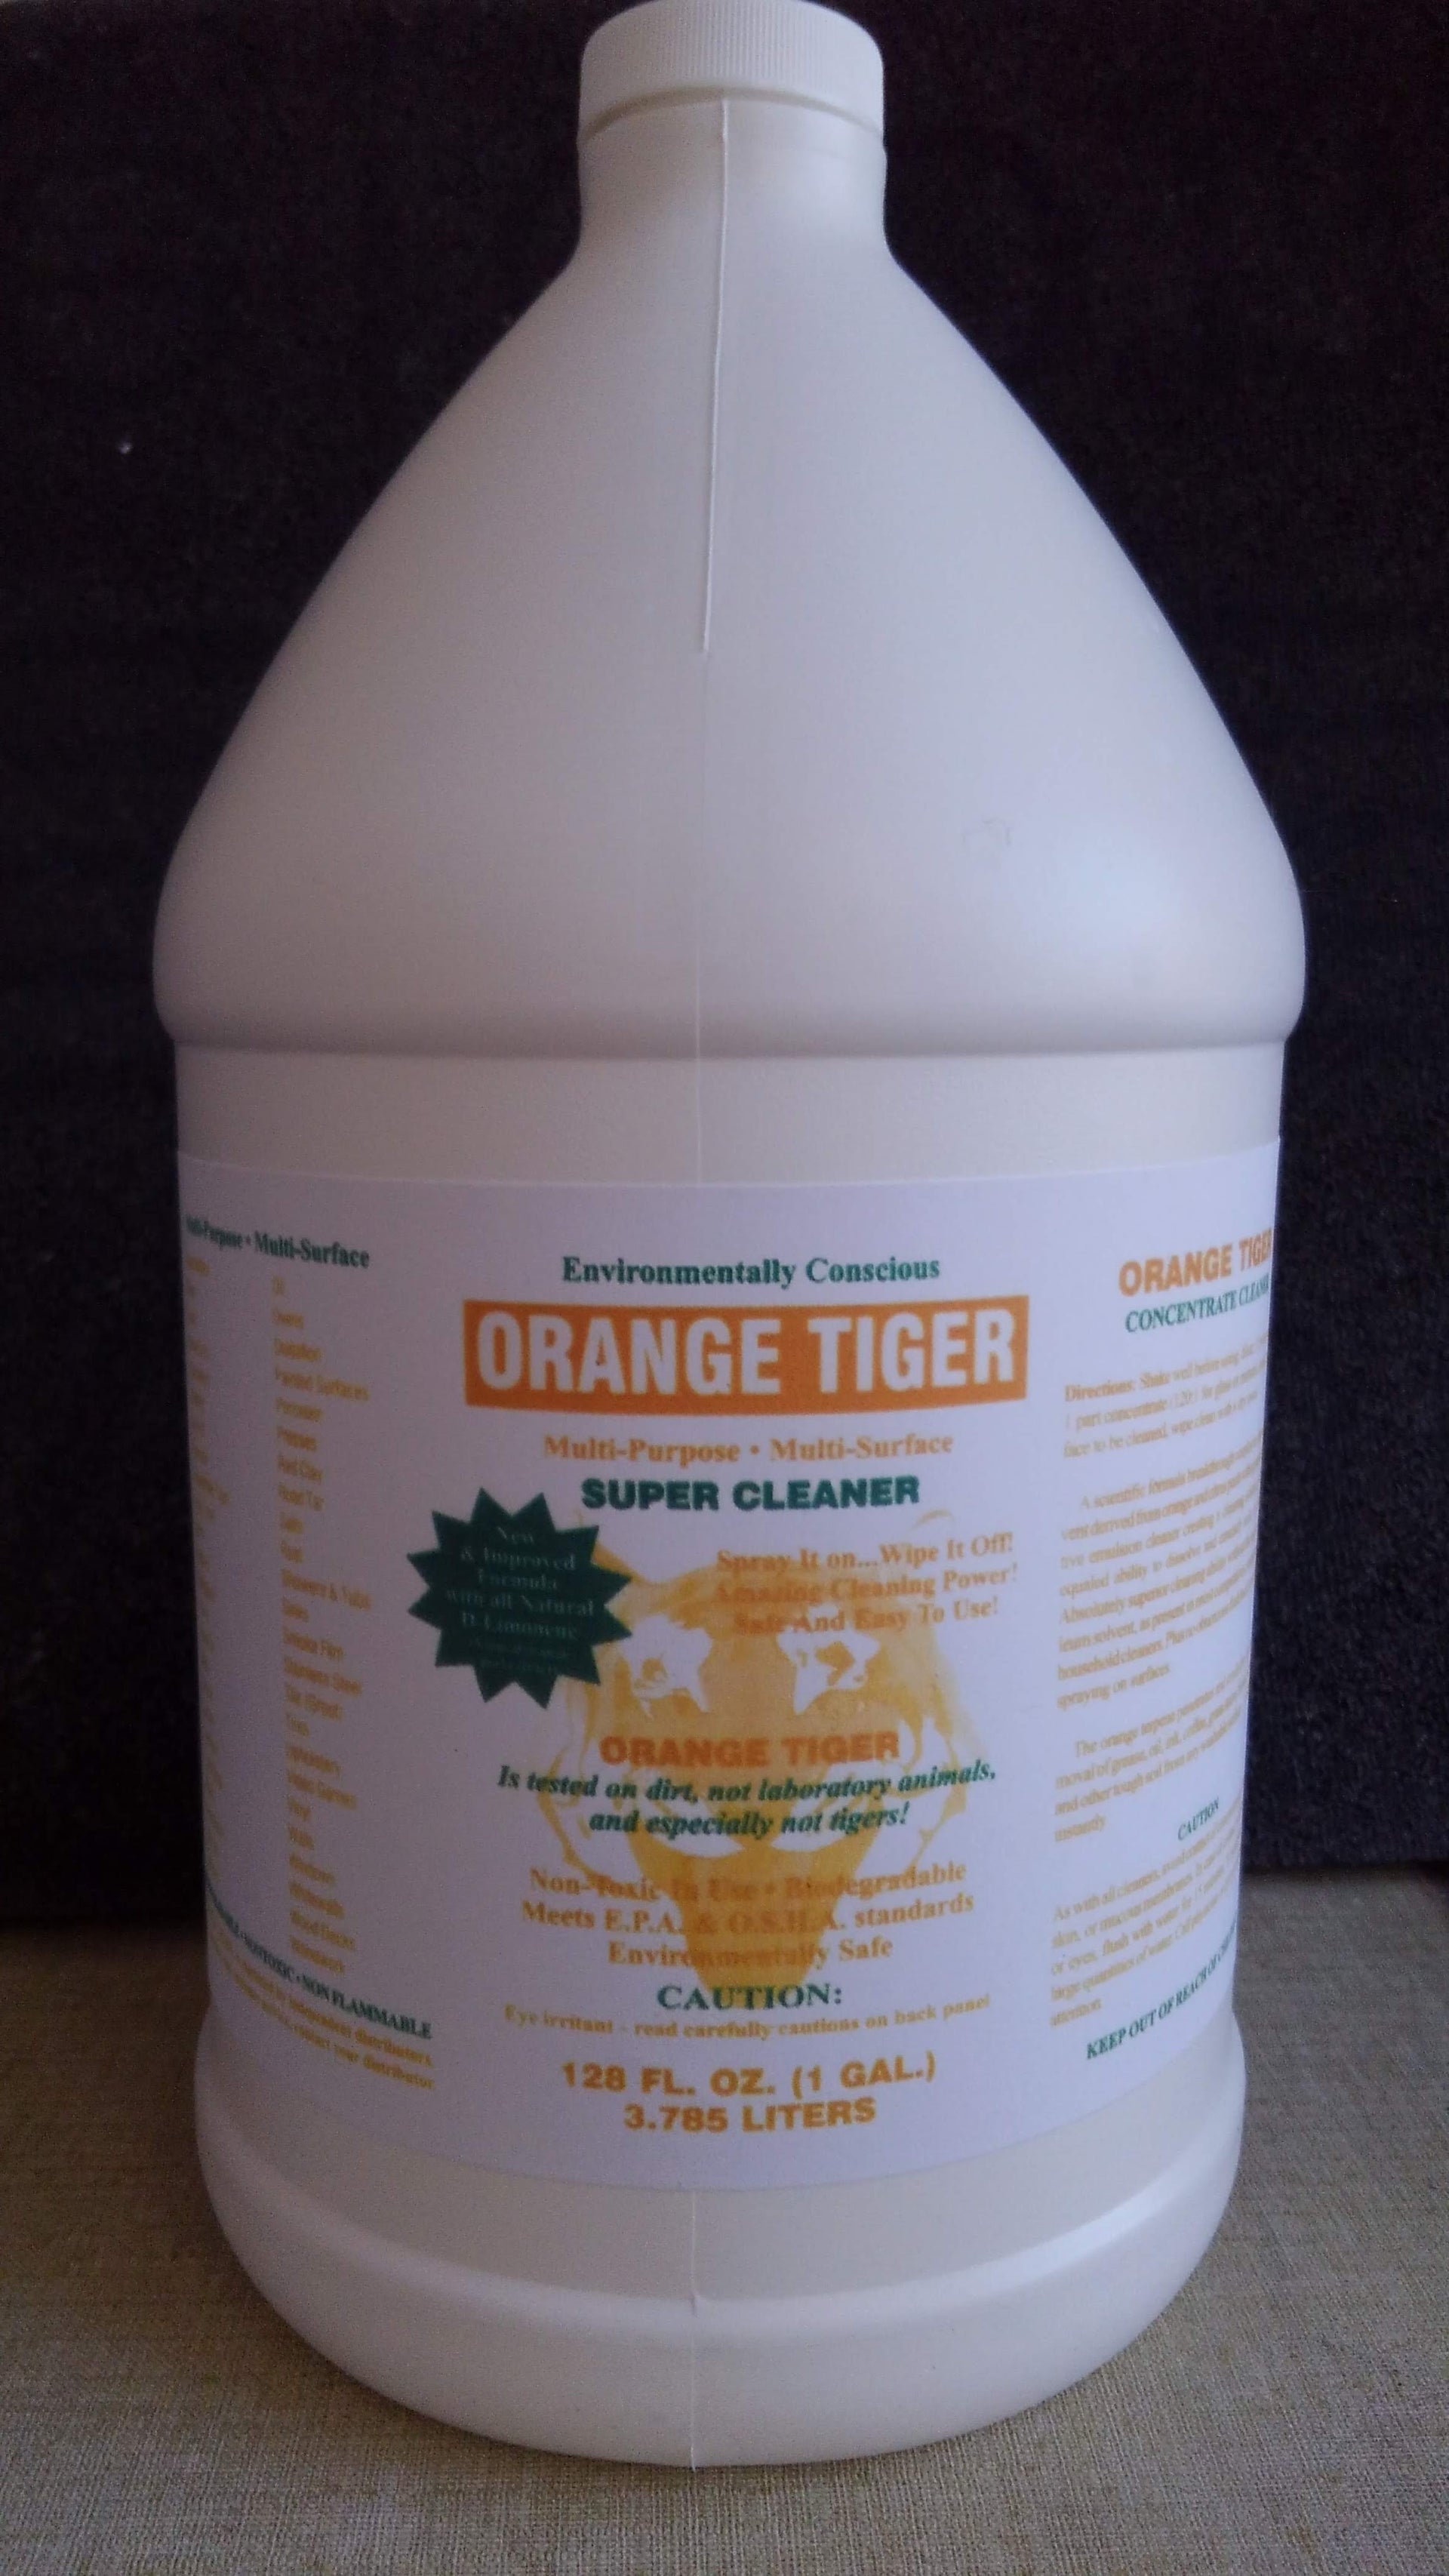 Over and Out | RTU - All Purpose Orange Cleaner 1 Unit (Gallon bottle) Ready to Use